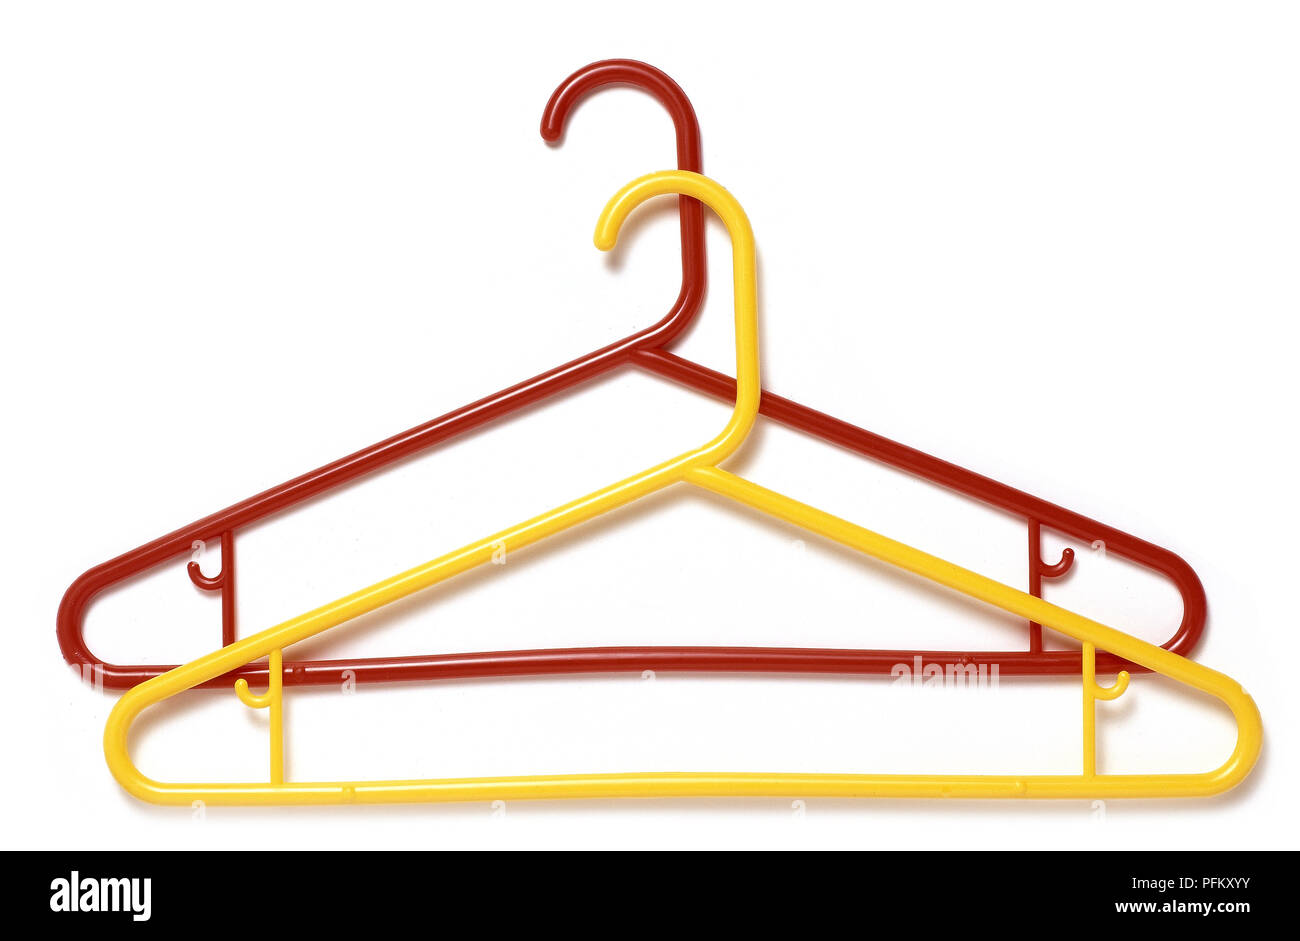 Red and yellow plastic coat hangers, one on top of the other Stock Photo -  Alamy